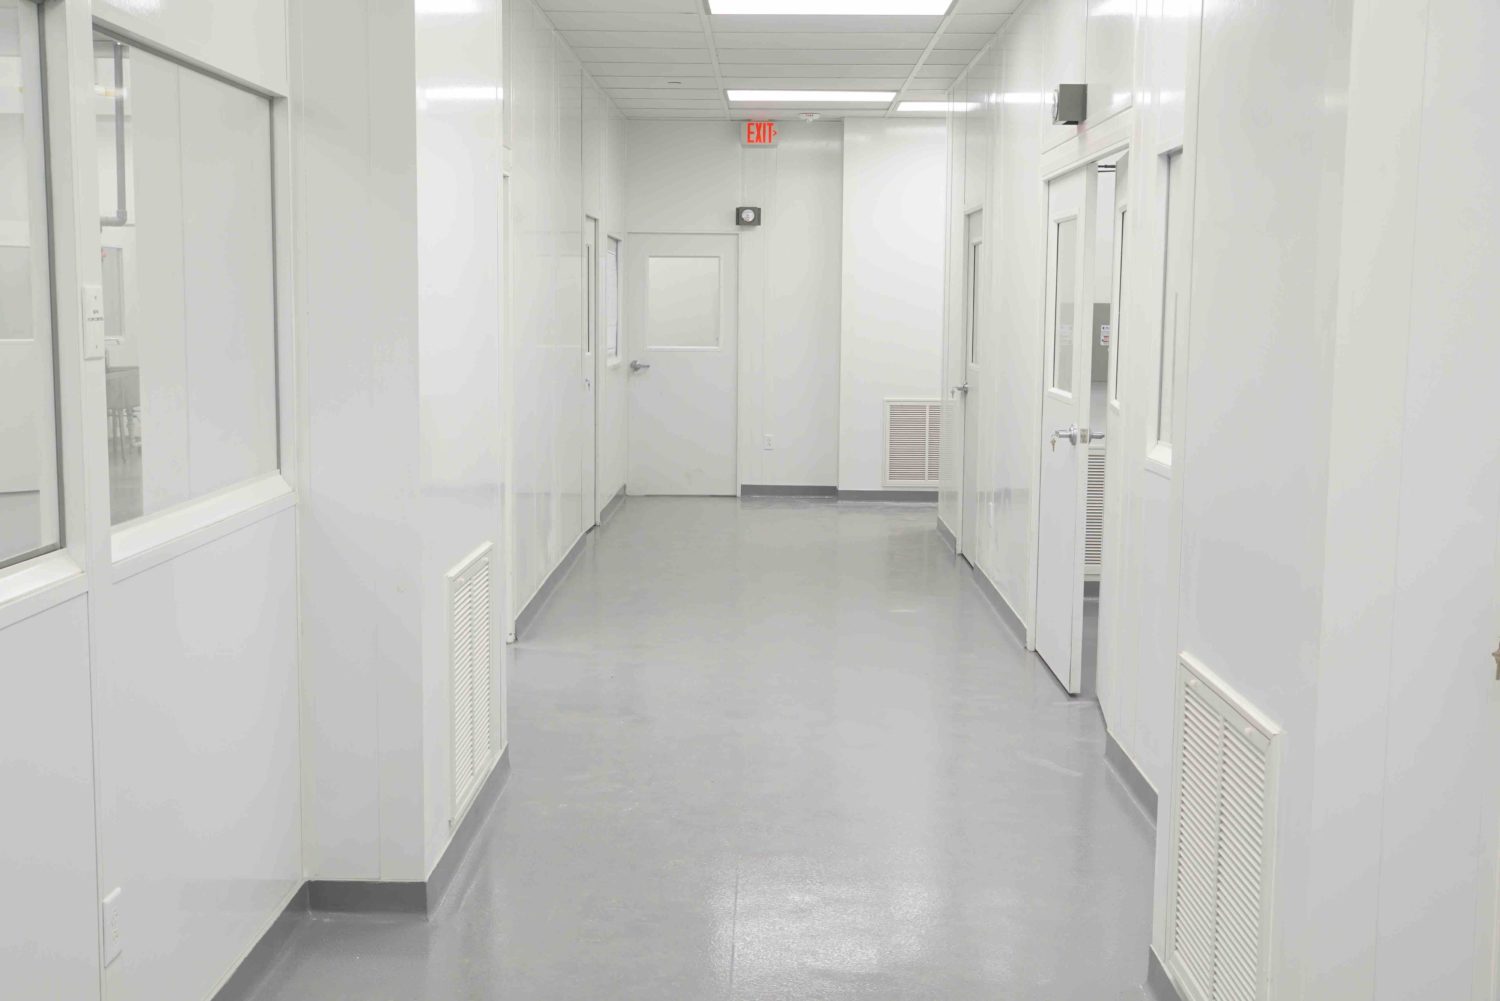 Frequently Asked Questions About Cleanroom Classifications